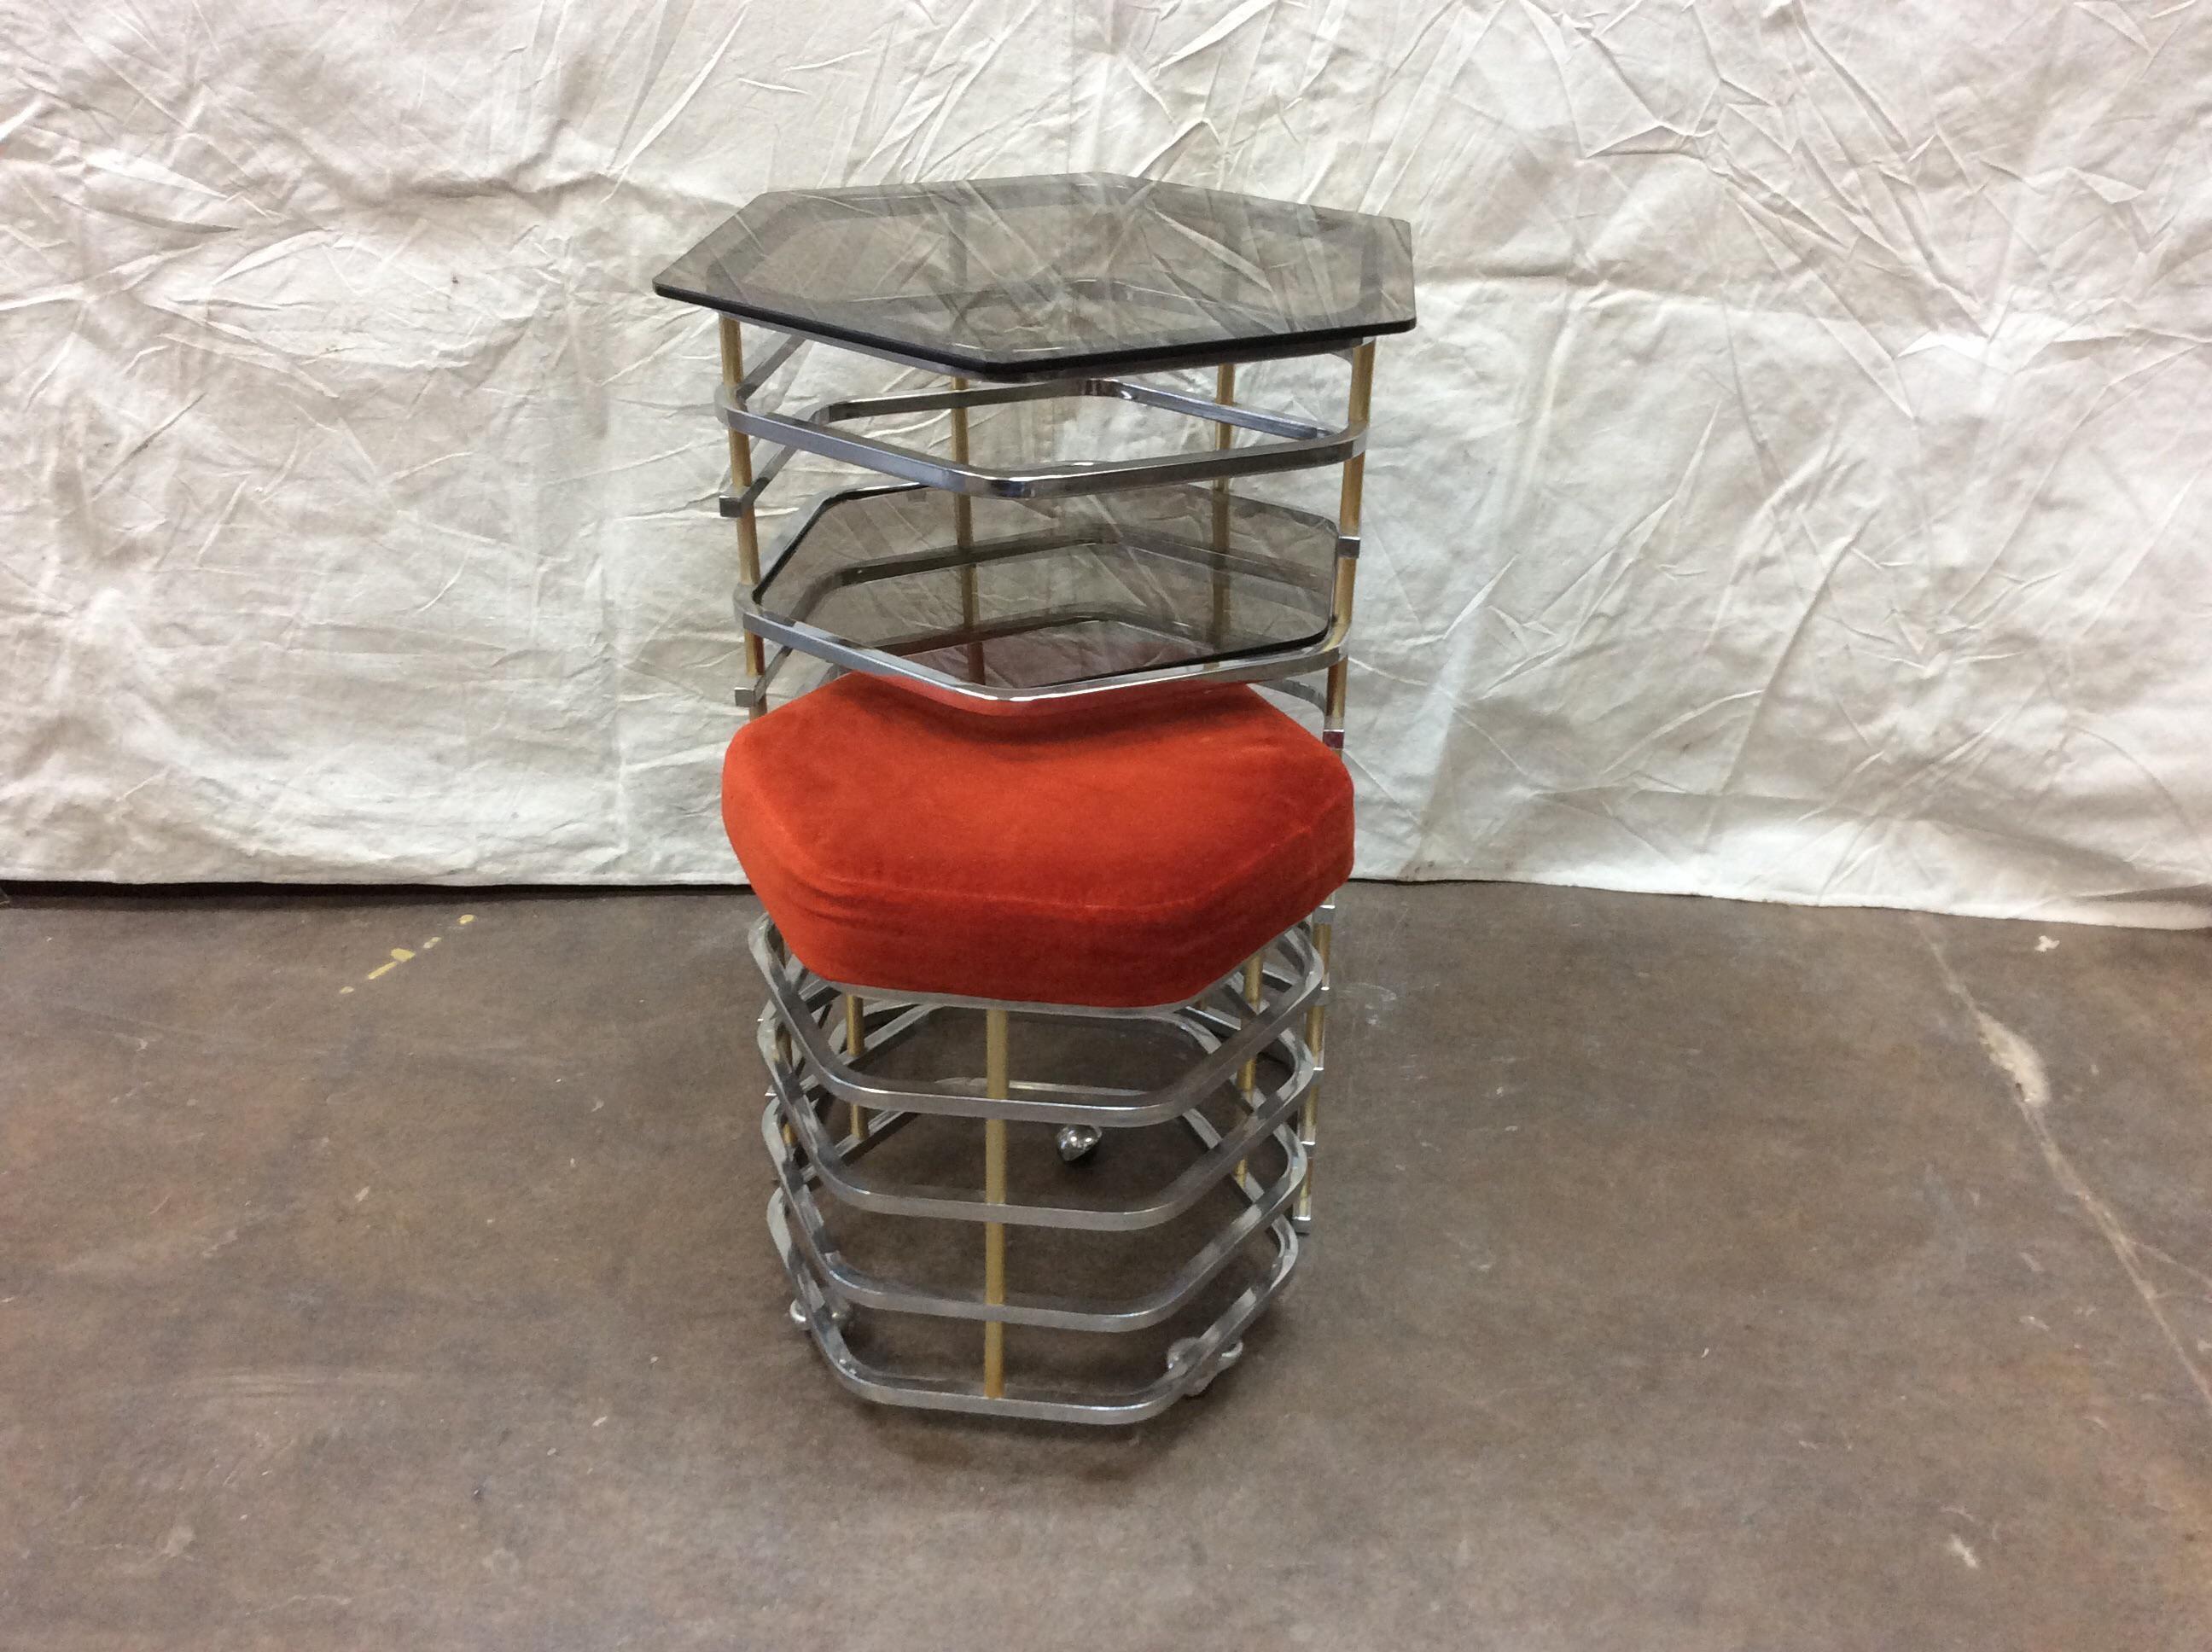 A wonderful midcentury Italian vanity table and stool set from the 1970s. Architectural in the design of a column of eleven tiers of chrome bars. Each tier is supported by small round brass rods allowing for an open and light appearance. The stool